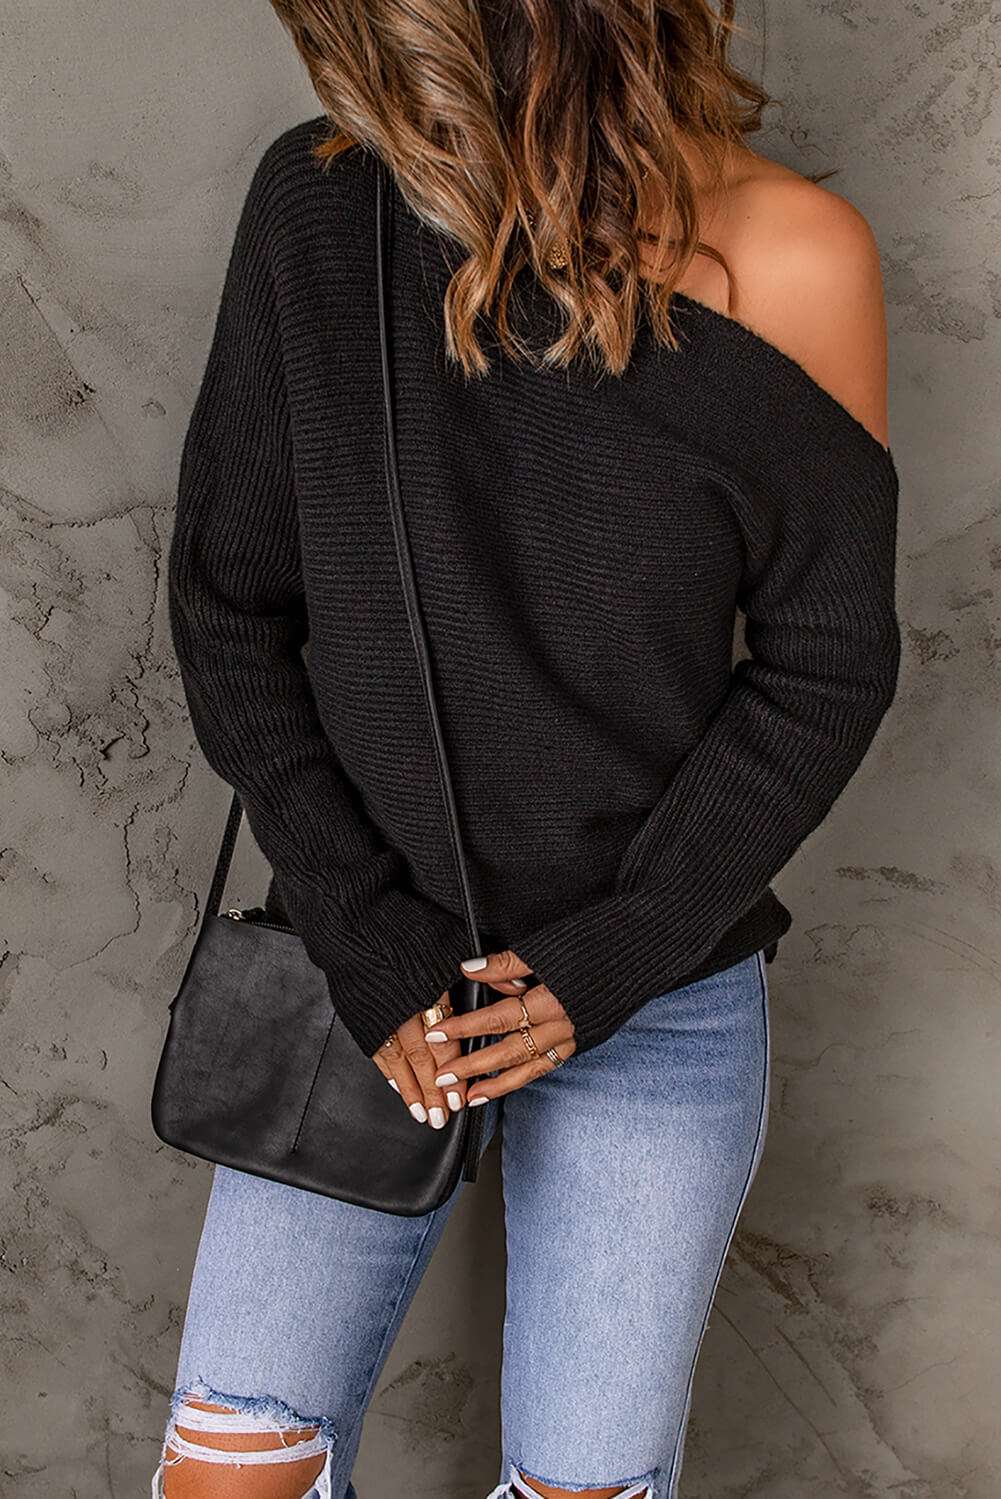 A Horizontal One-Shoulder Sweater